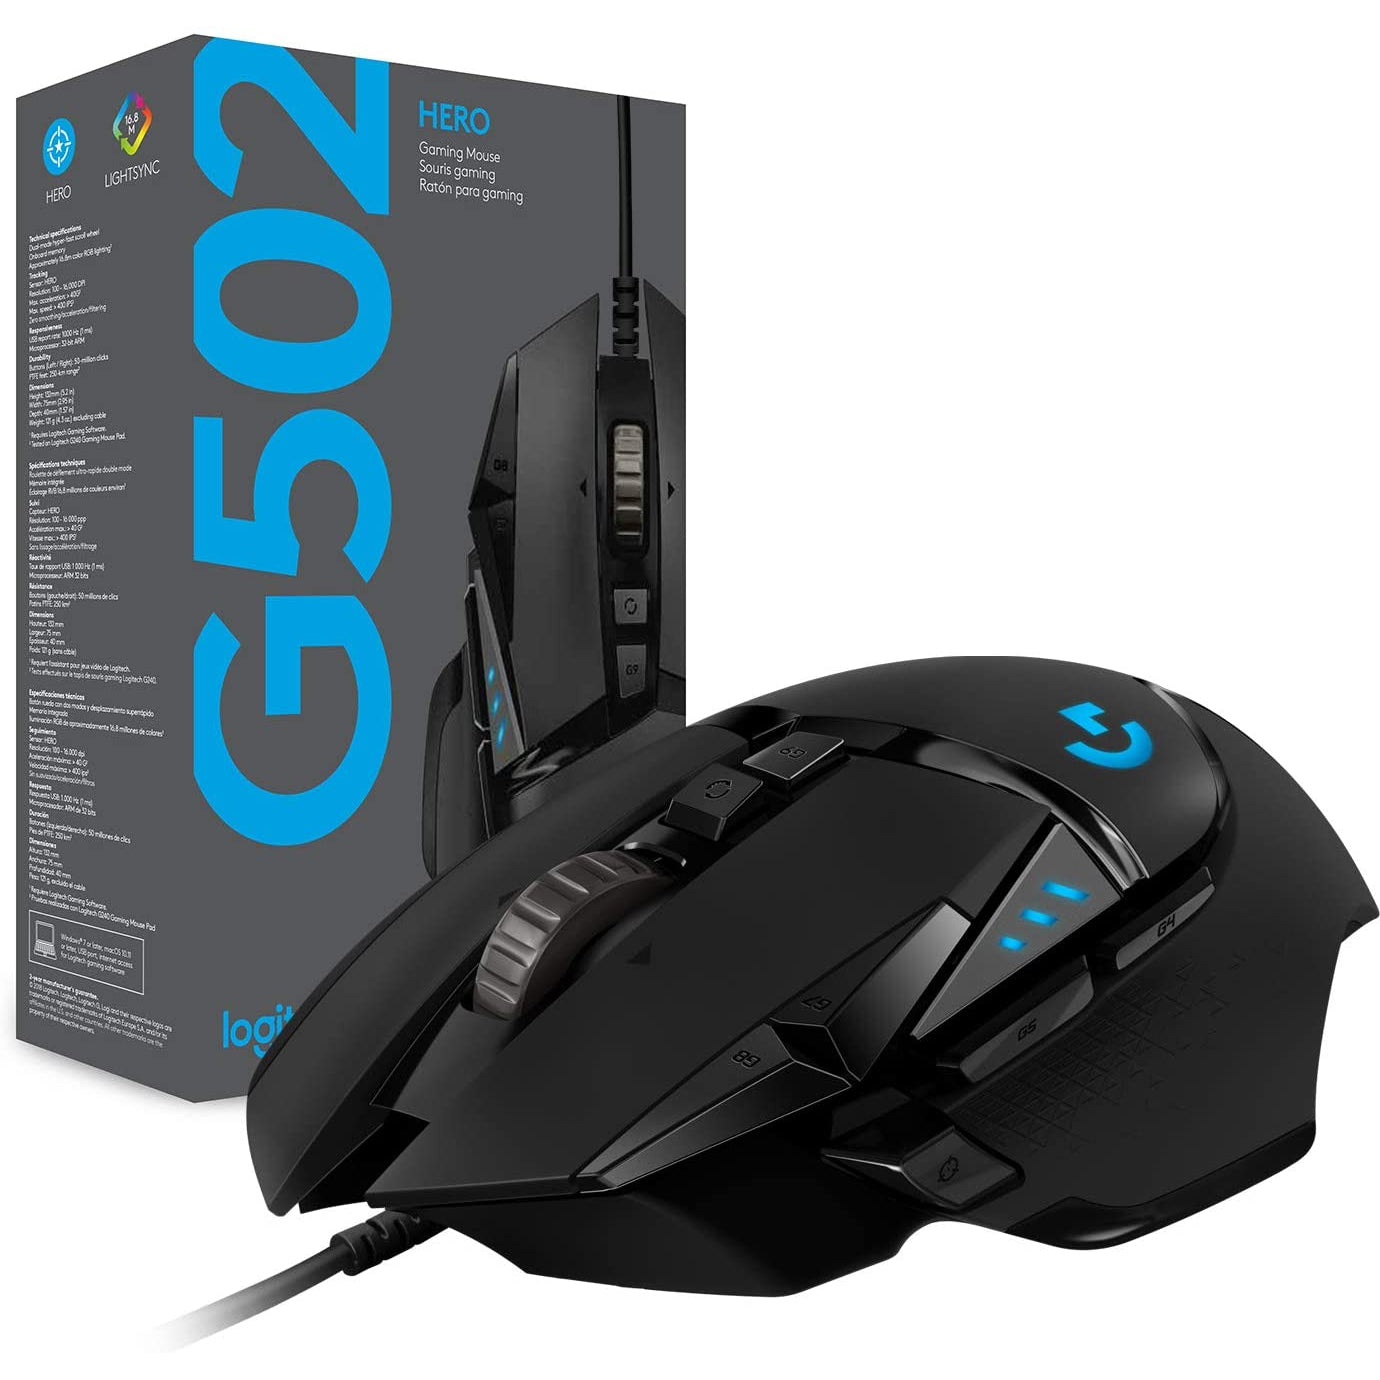 Logitech G502 HERO High Performance Wired Gaming Mouse - Black